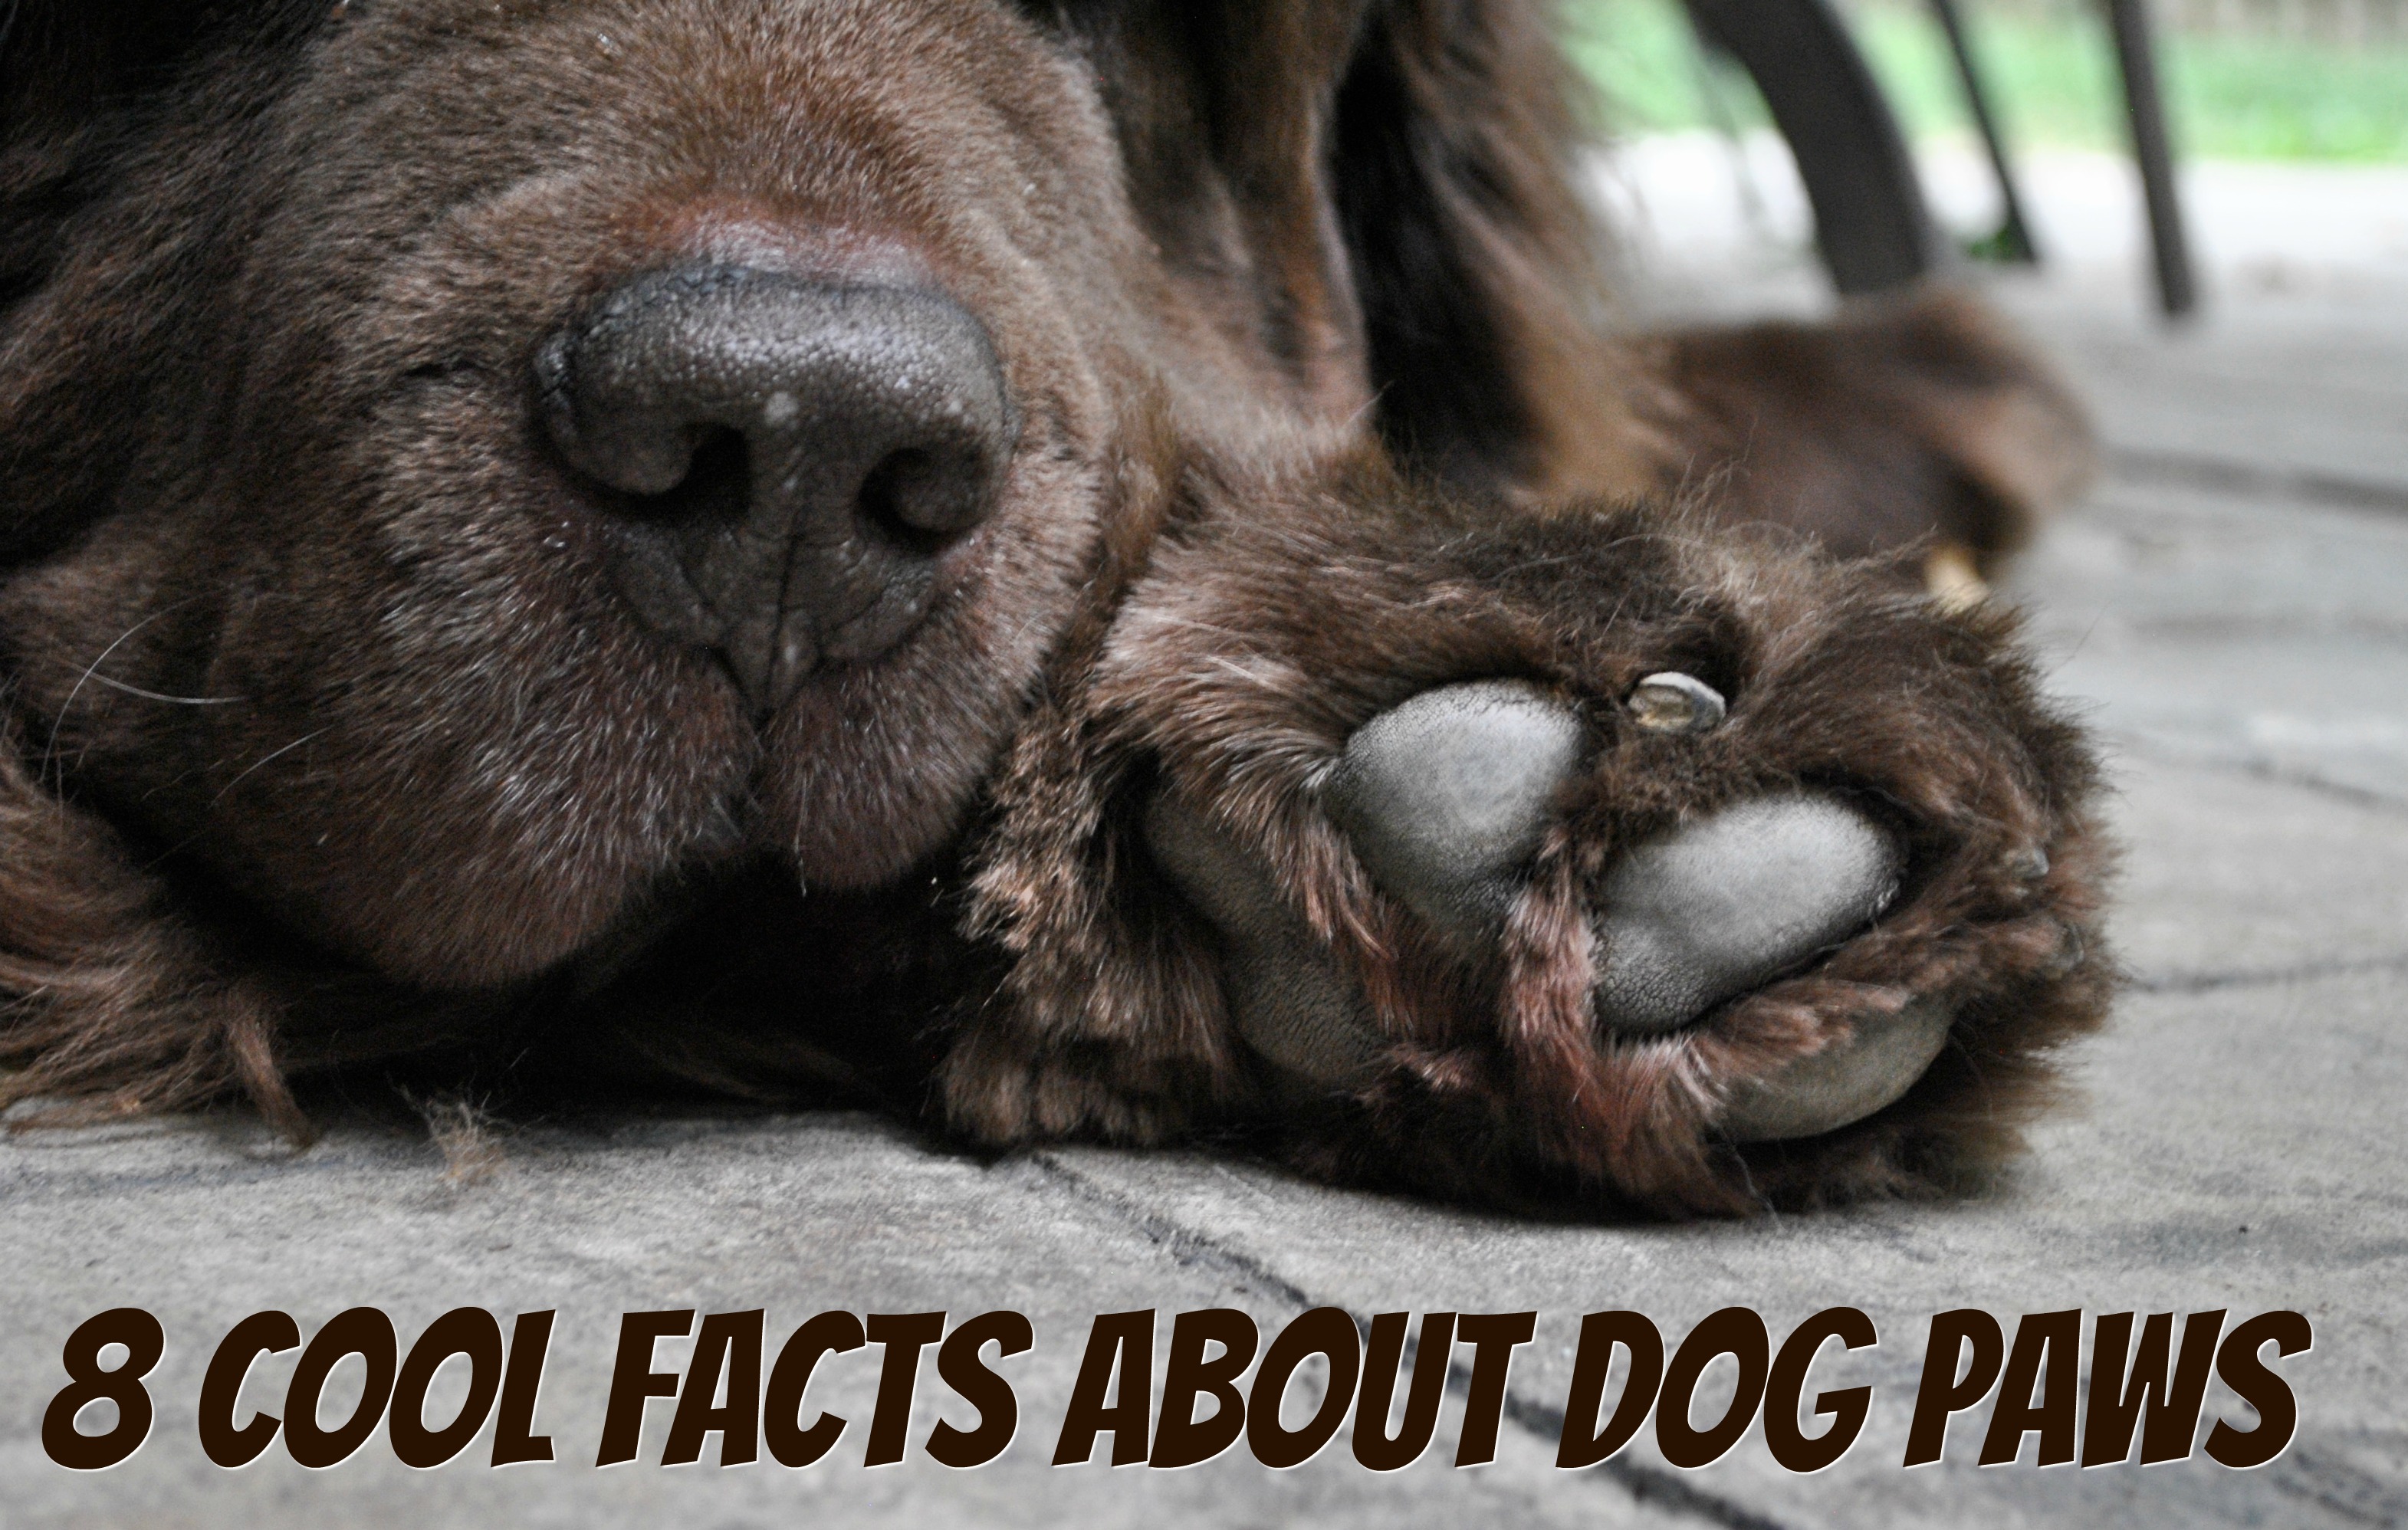 8 Cool Facts About Dog Paws - My Brown Newfies